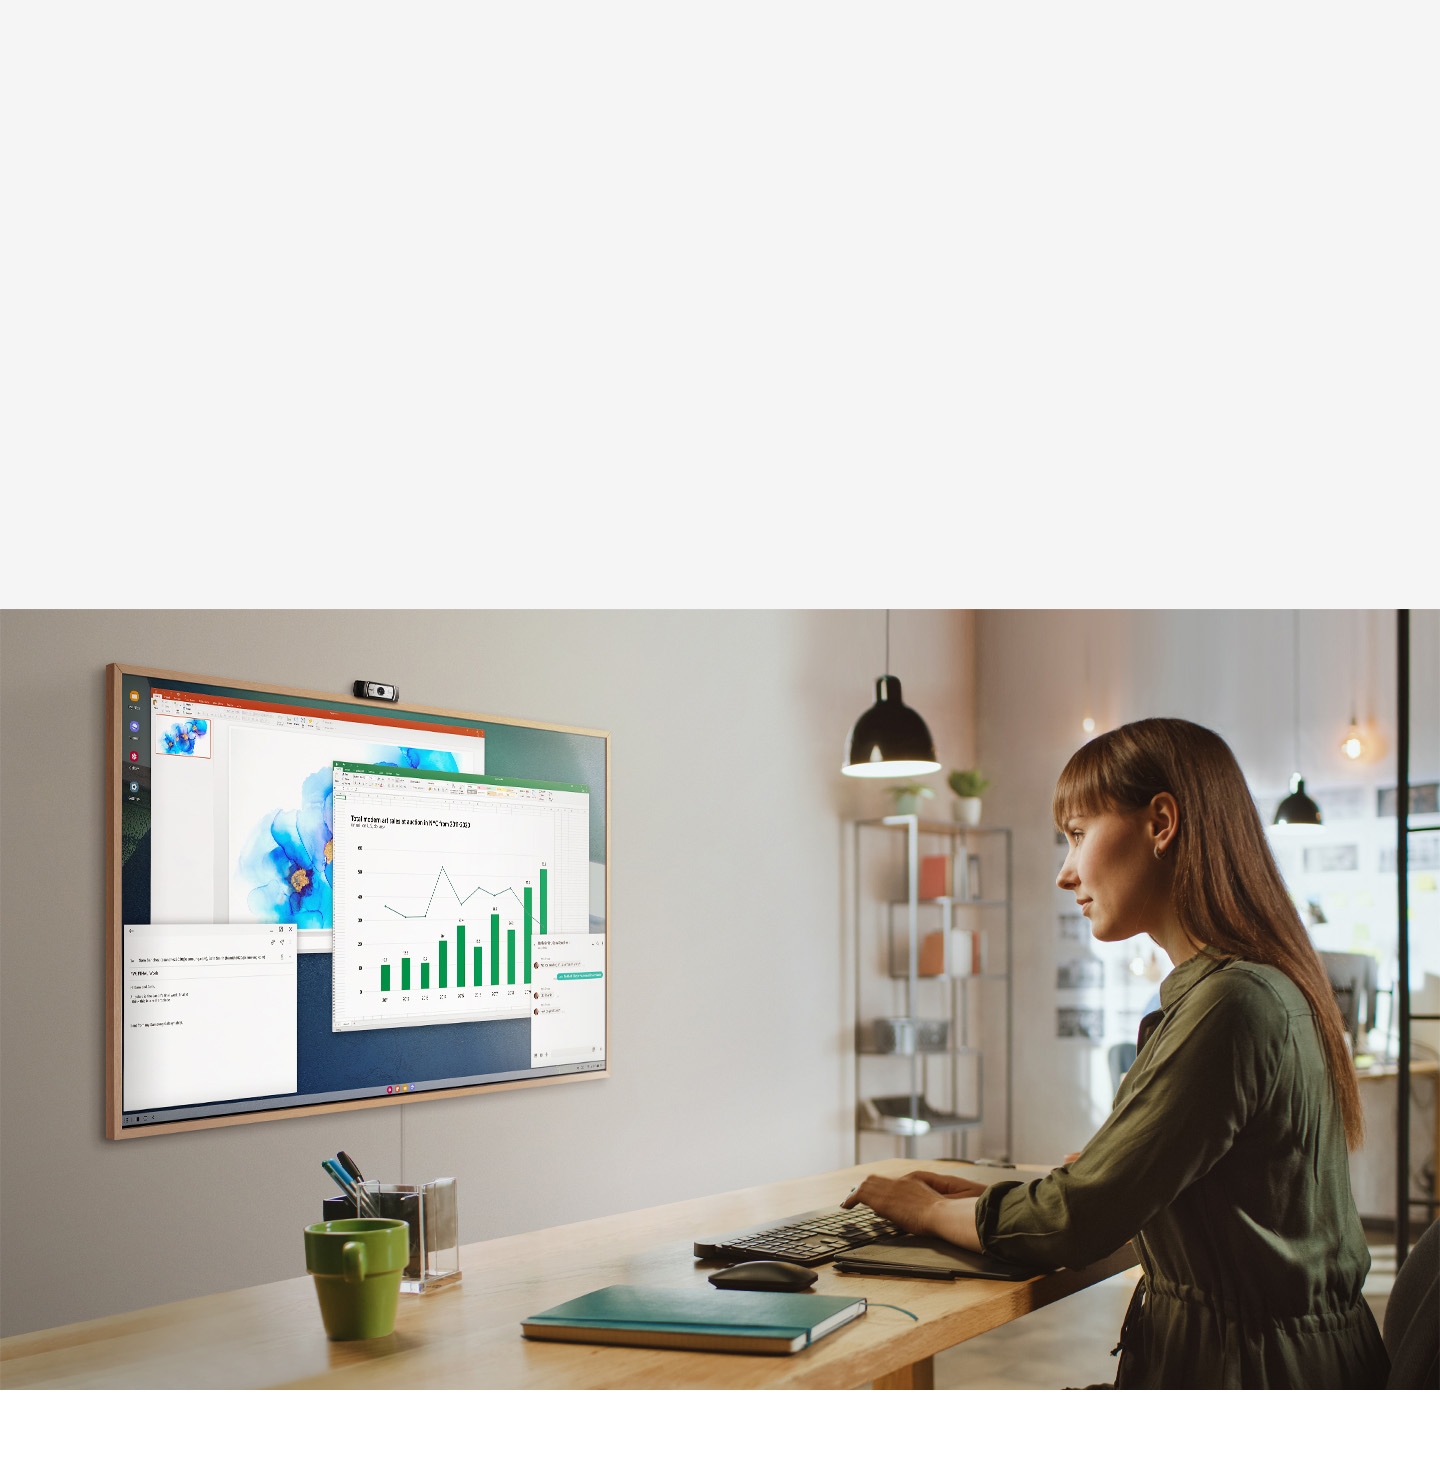 Description: A woman is using her office PC to do work on her TV screen at home. On the screen of The Frame are various office productivity windows.